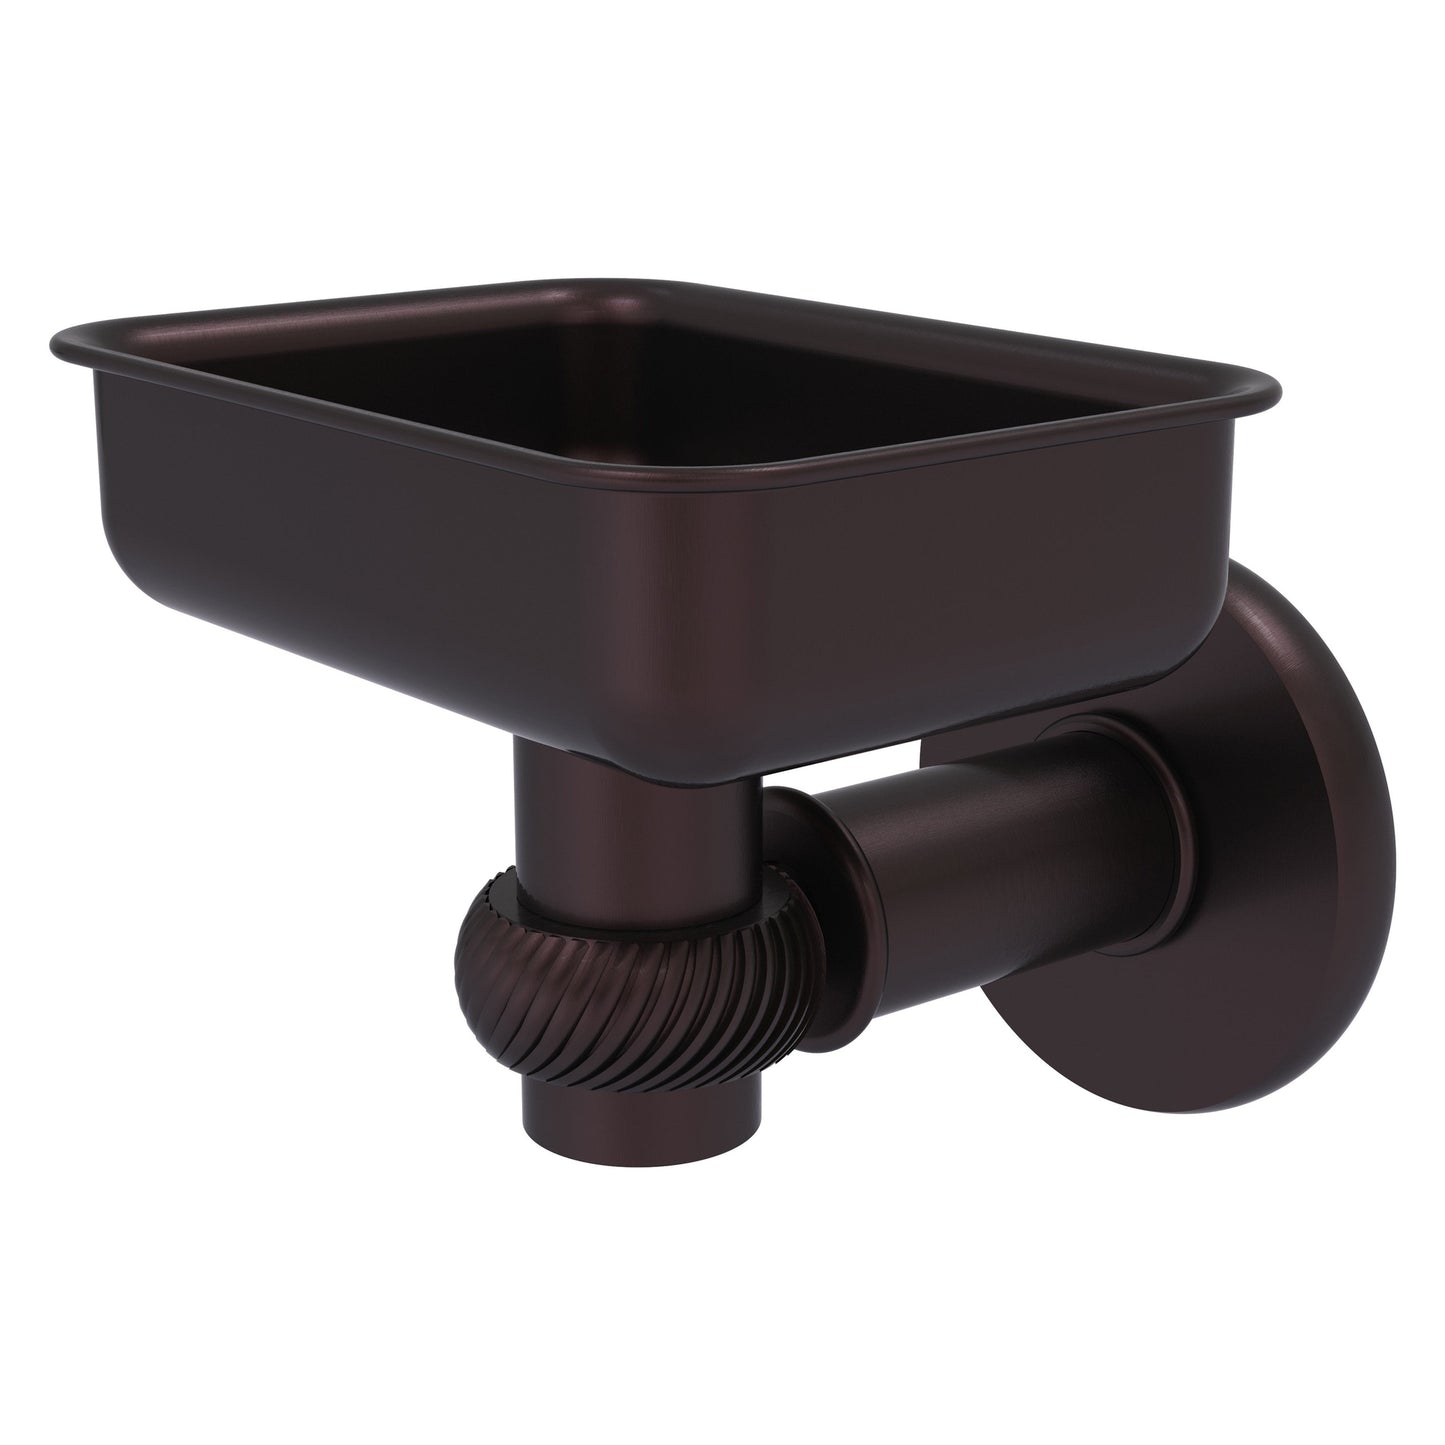 Allied Brass Continental 4.5" x 3.5" Antique Bronze Solid Brass Wall-Mounted Soap Dish Holder with Twist Accents